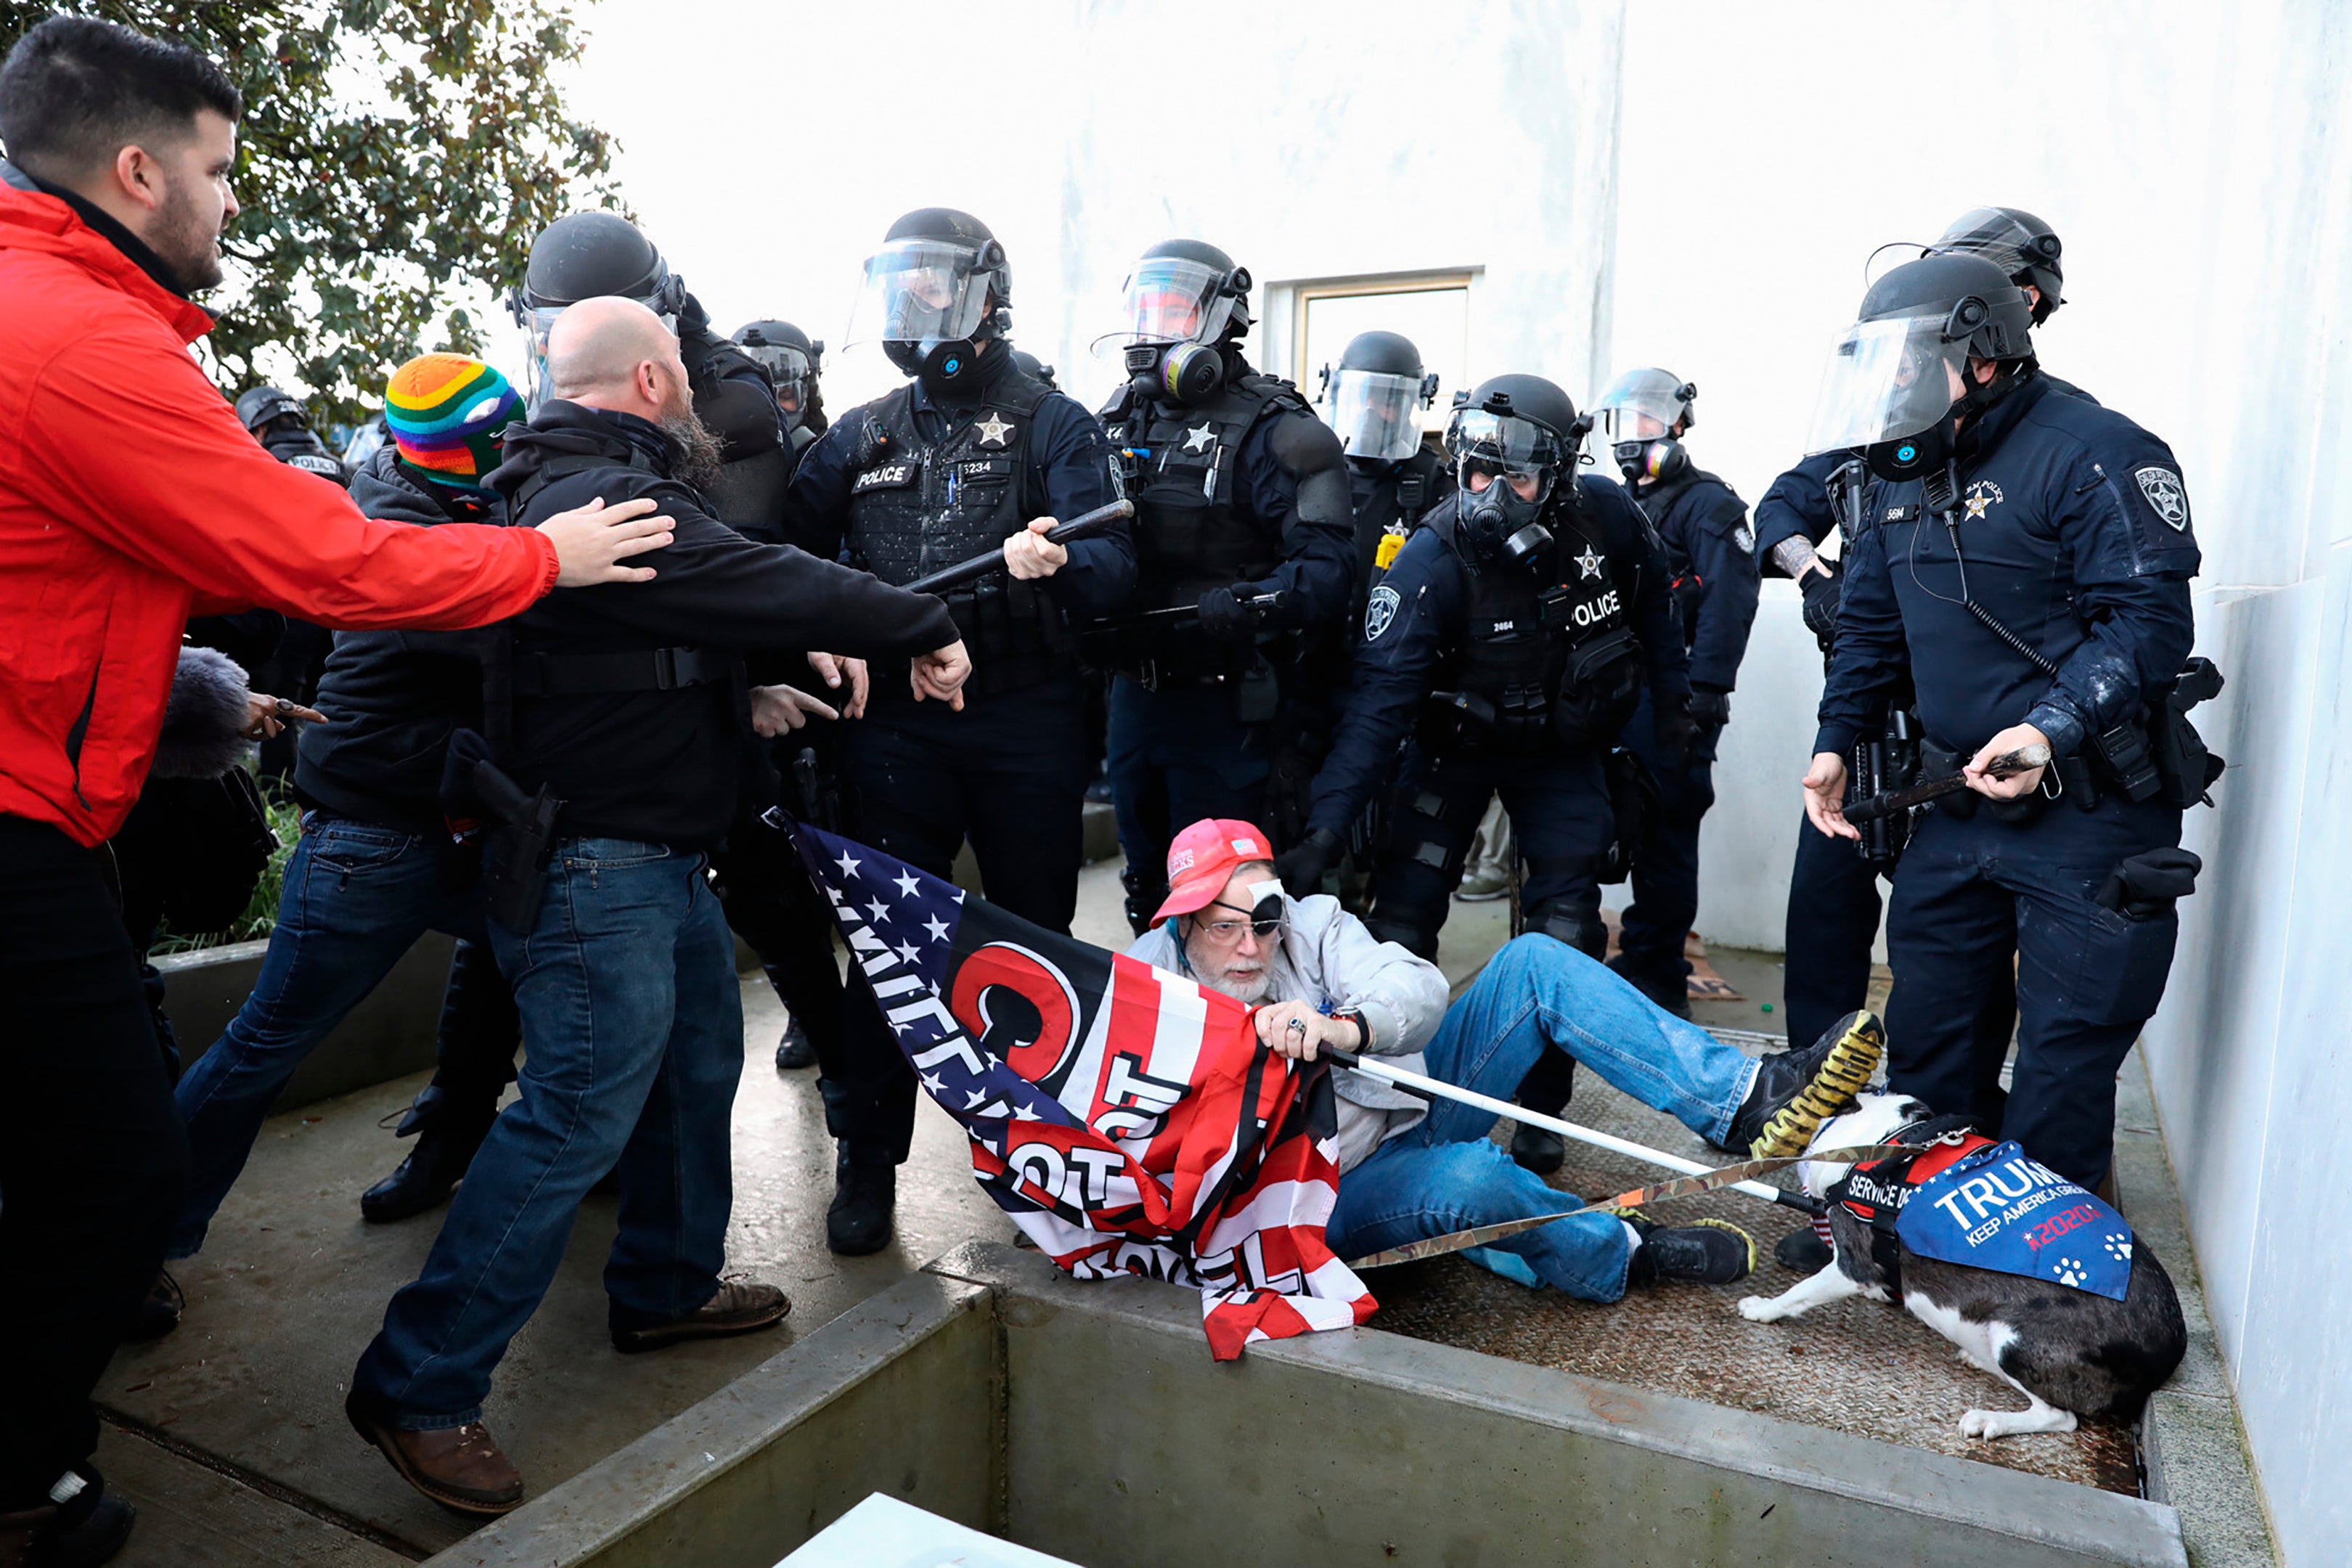 Law enforcement officers and right-wing protesters clash outside the Oregon State Capitol